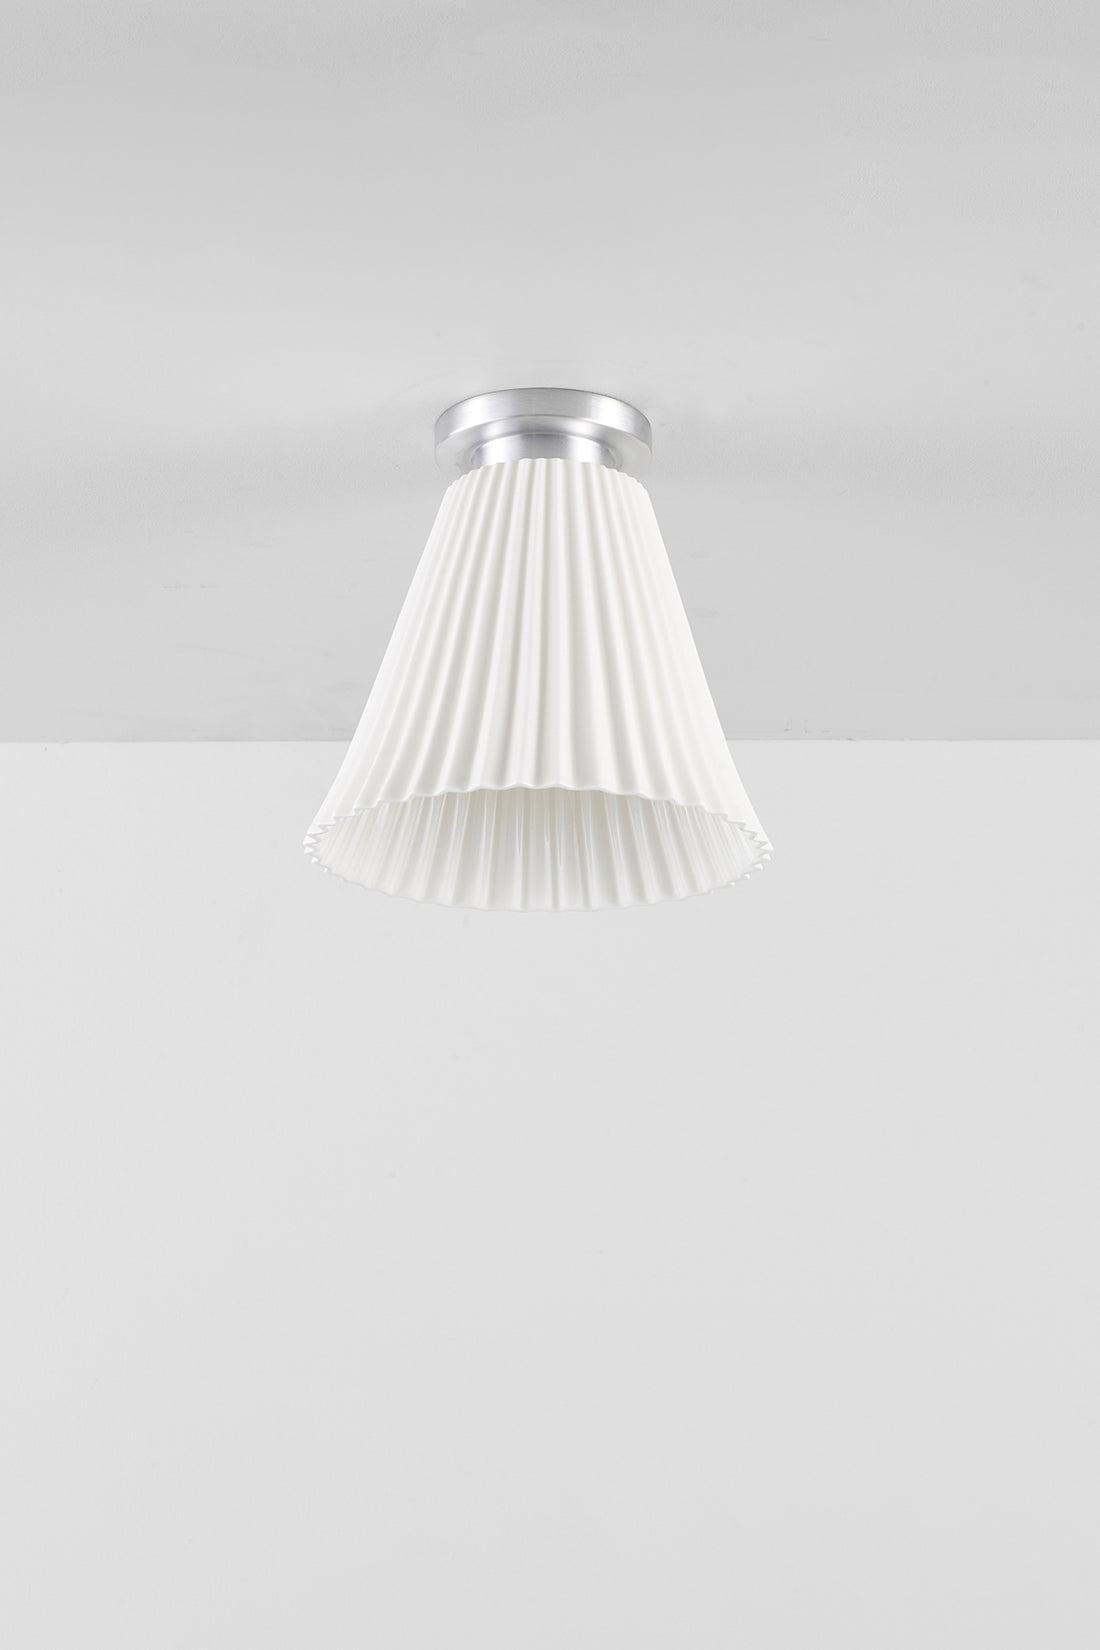 Hector Large Pleat Ceiling Light